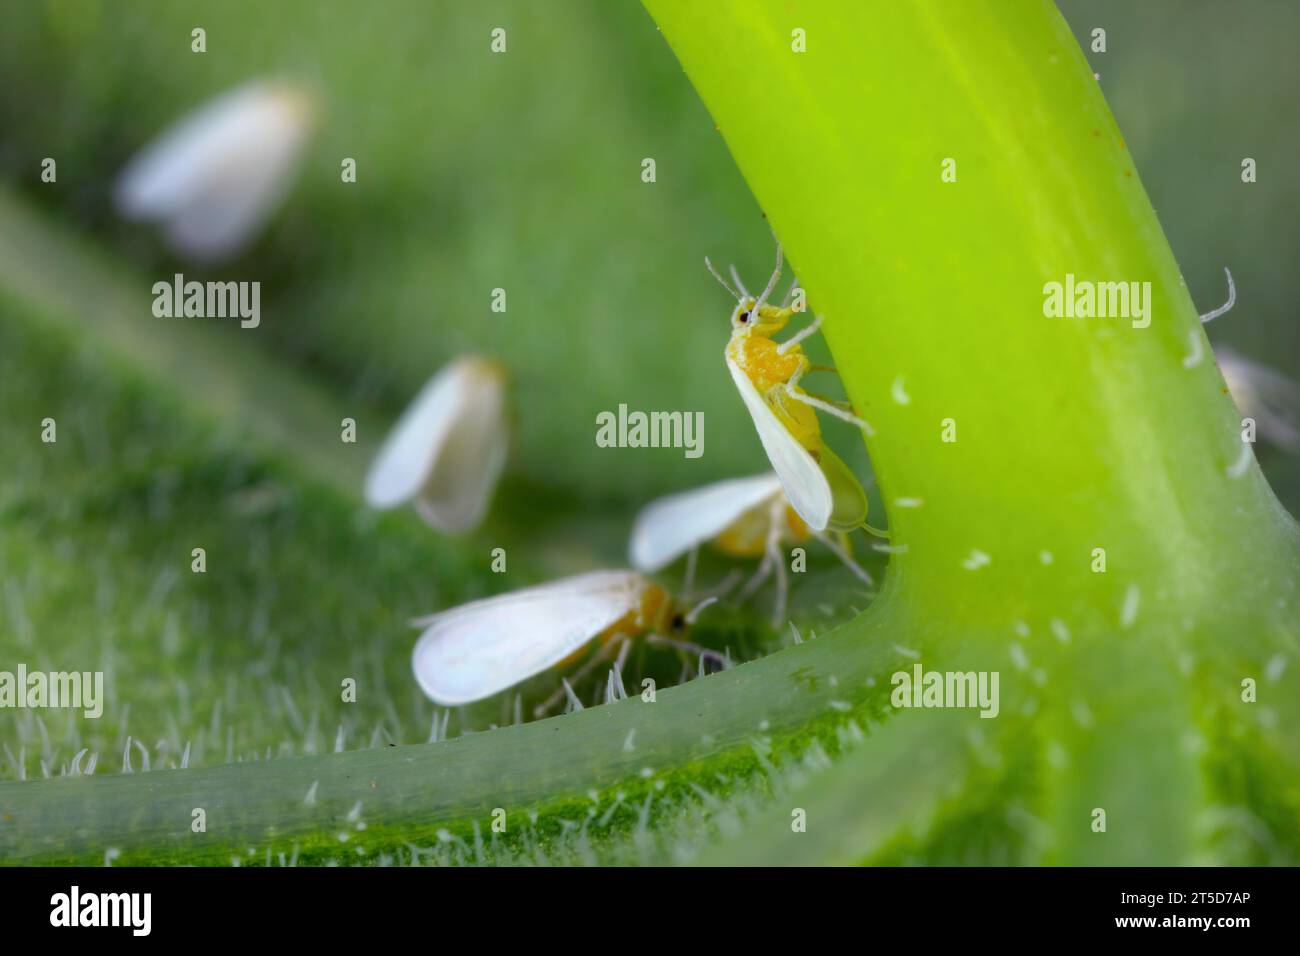 Greenhouse whitefly (Trialeurodes vaporariorum), group feeding and laying eggs on a nasturtium leaf. Stock Photo